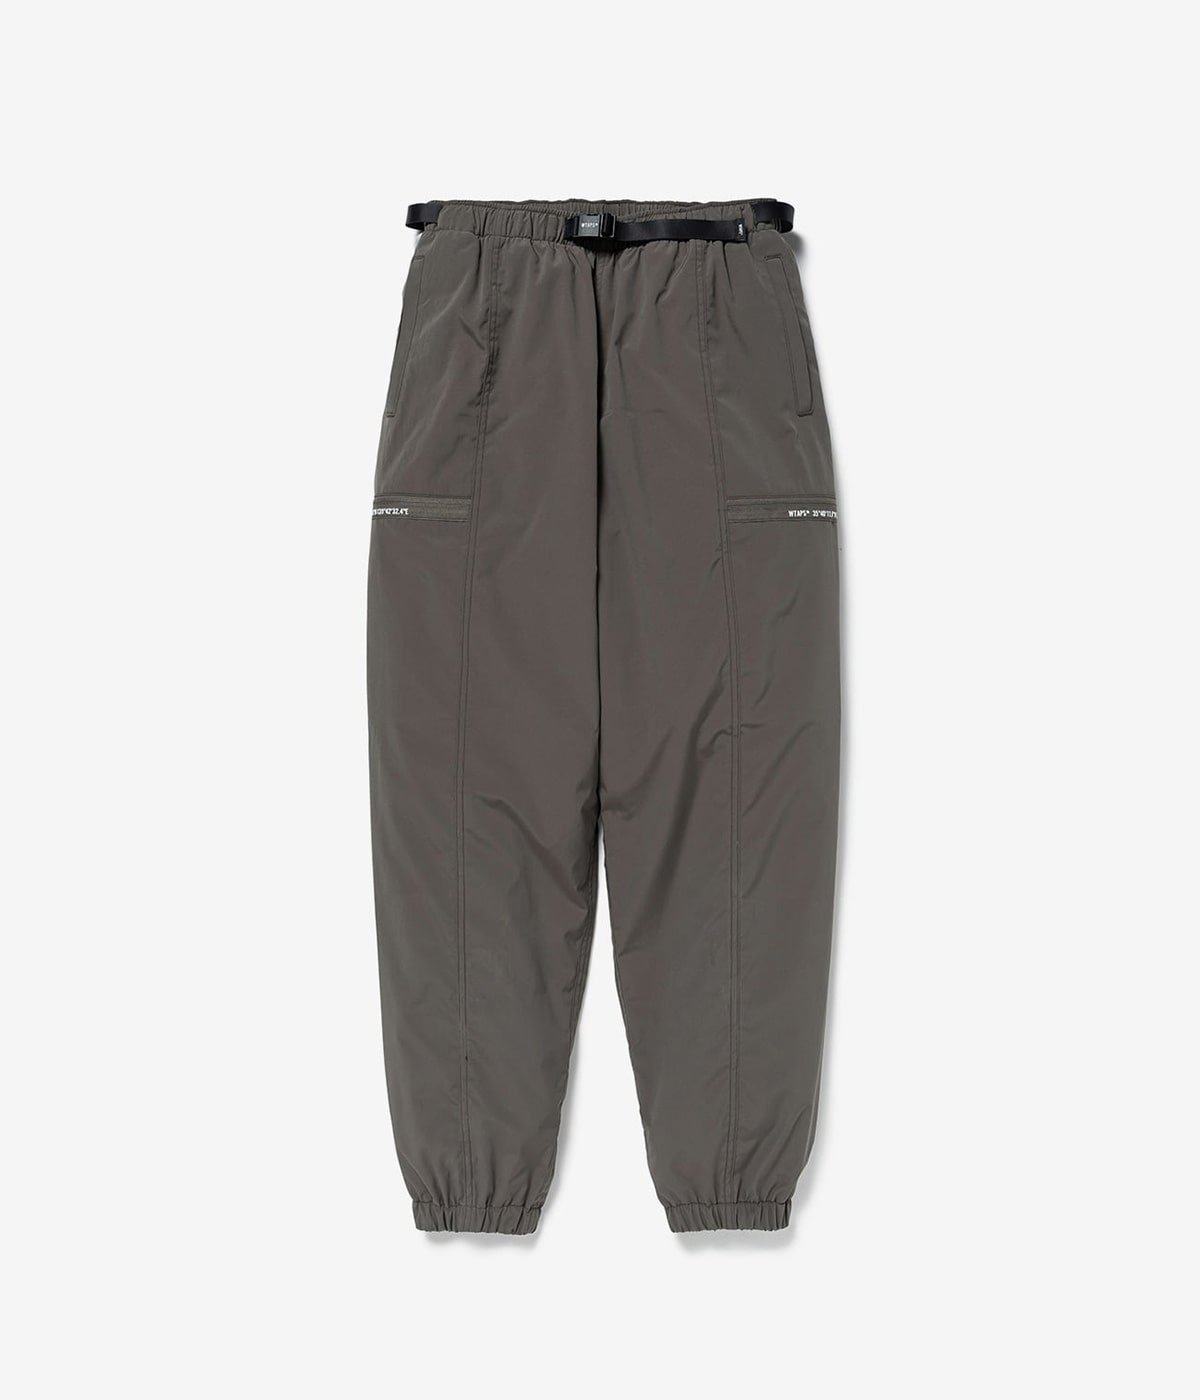 SPST2002 / TROUSERS / POLY. TUSSAH | WTAPS(ダブルタップス 